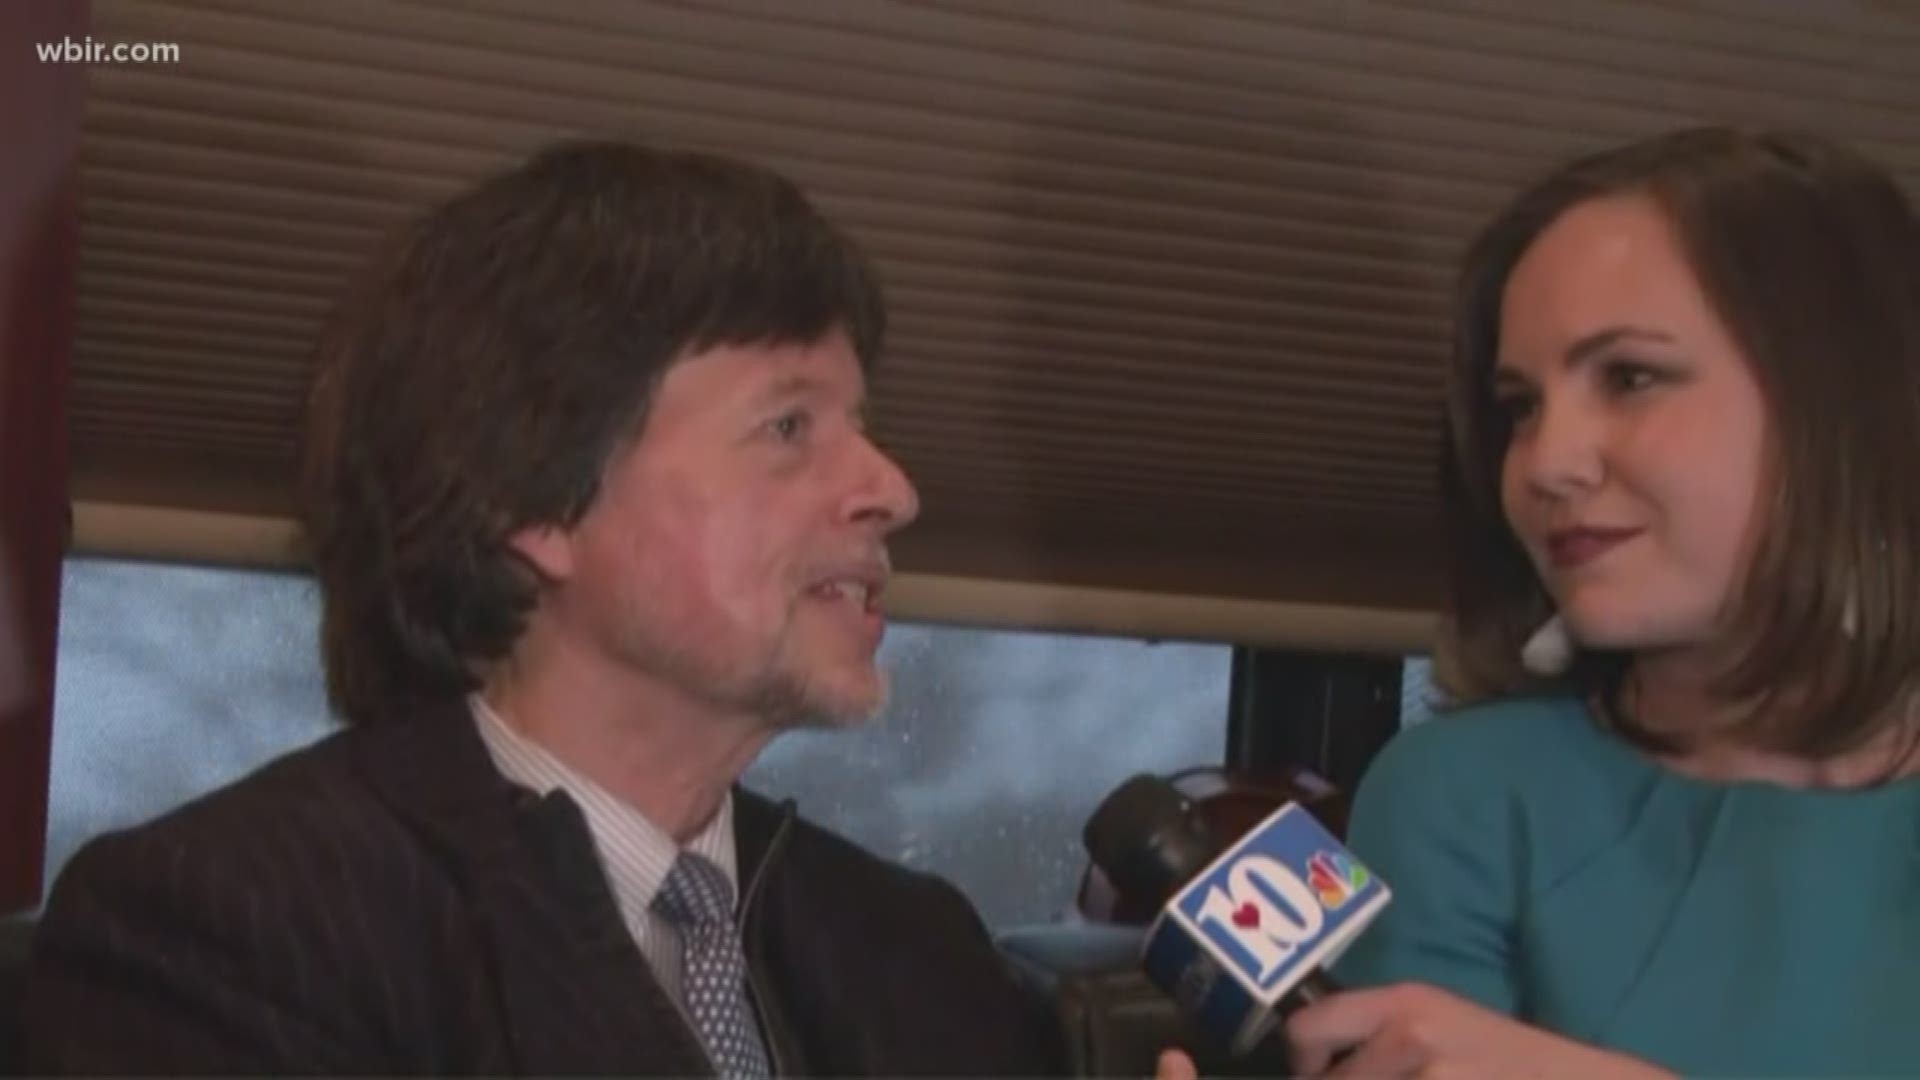 Documentary filmmaker Ken Burns comes to East Tennessee on a 30-city tour to preview his upcoming documentary 'Country Music' which premieres on PBS in September. You can learn more at easttennesseepbs.org. March 25, 2019-4pm